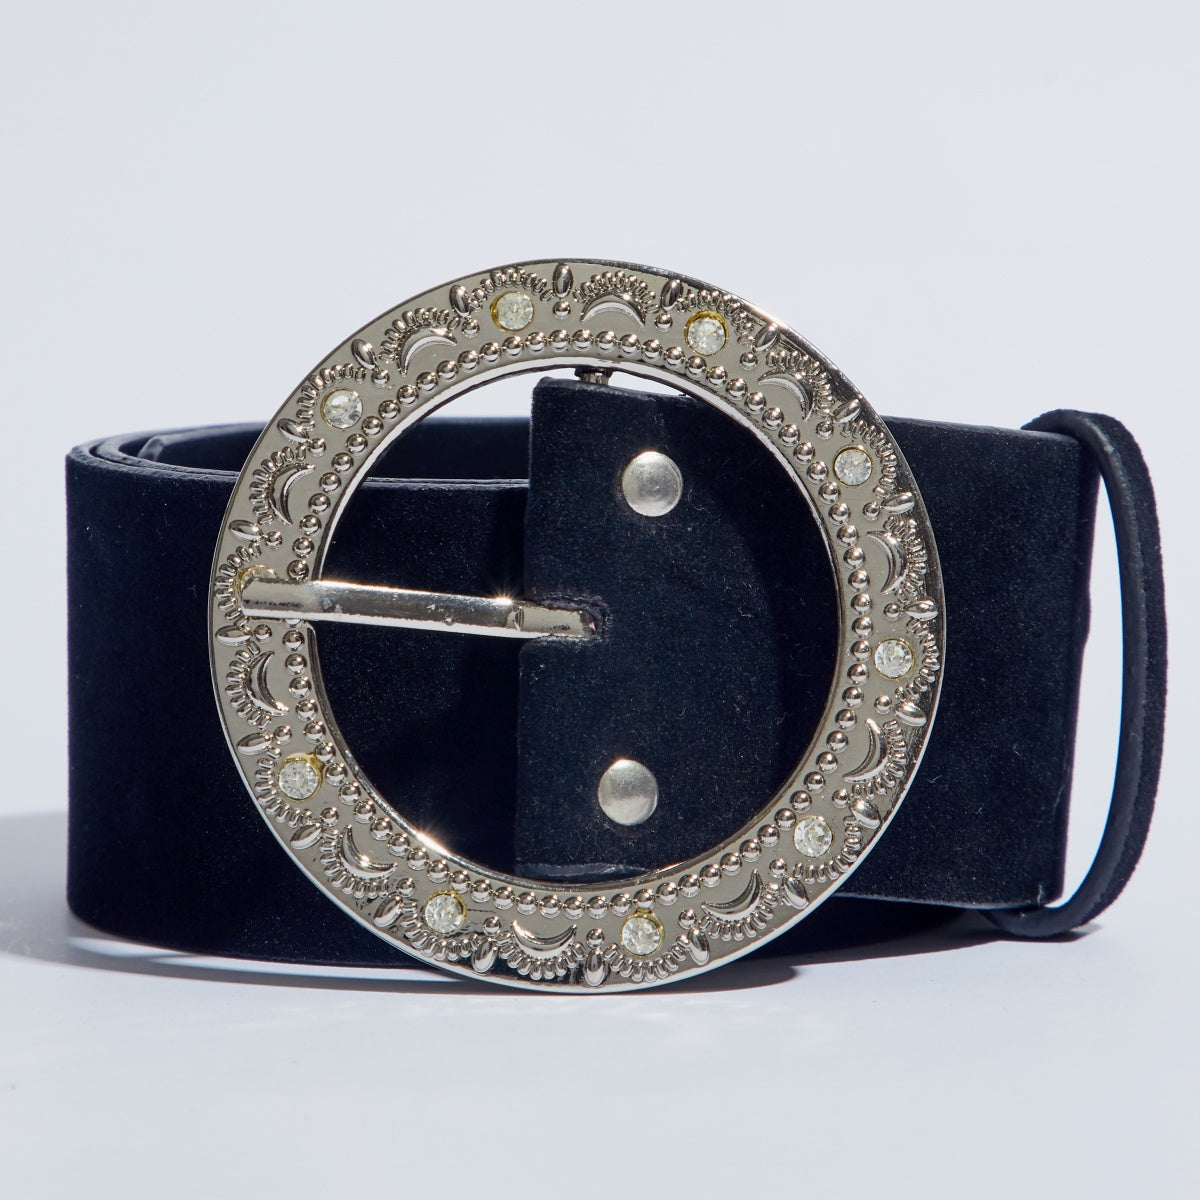 The Classy Thick Belt by Madish